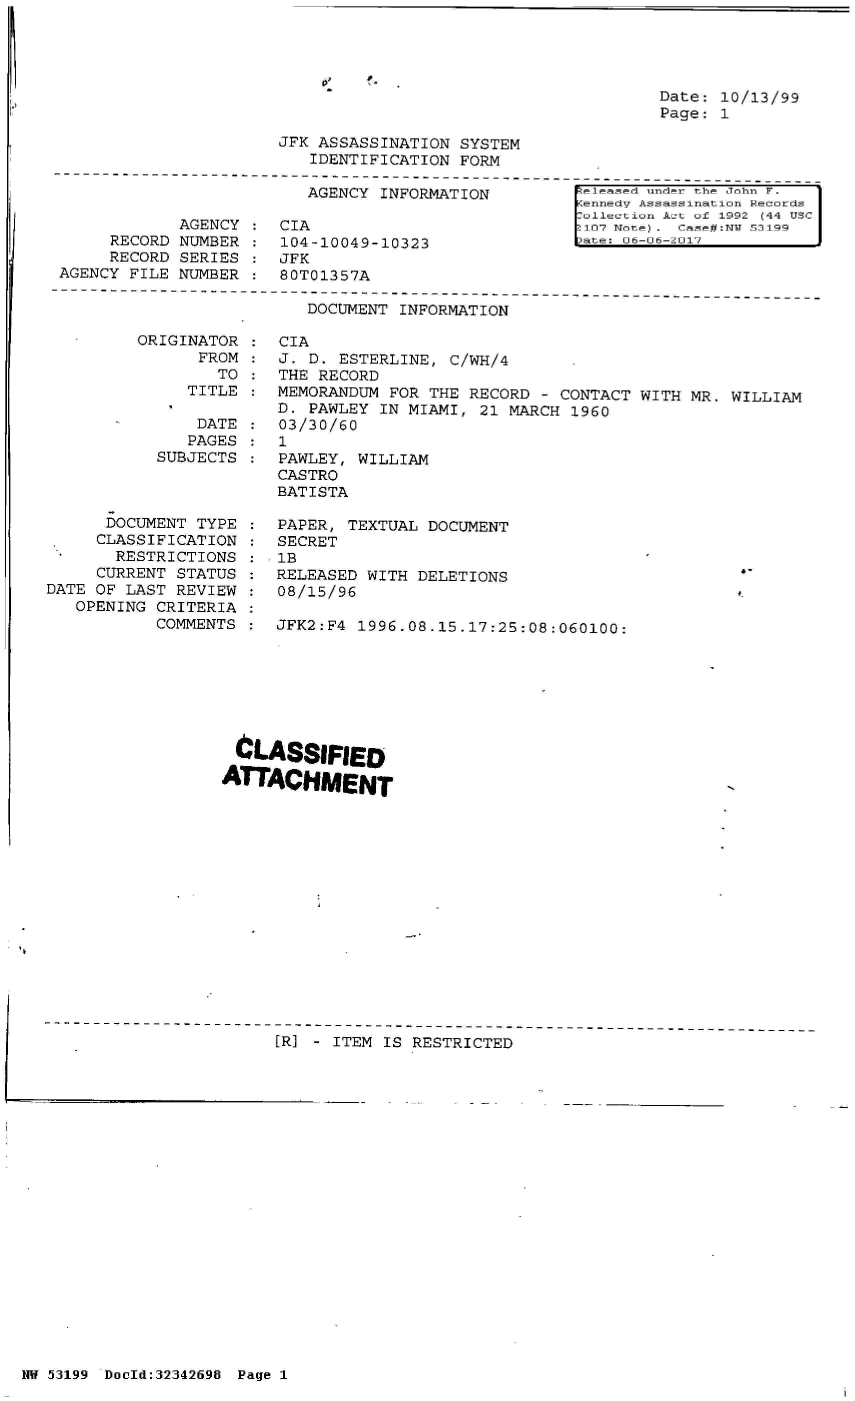 handle is hein.jfk/jfkarch05968 and id is 1 raw text is: 



0


Date: 10/13/99
Page: 1


JFK ASSASSINATION SYSTEM
   IDENTIFICATION FORM


                         AGENCY  INFORMATION

            AGENCY  : CIA
     RECORD NUMBER  :  104-10049-10323
     RECORD SERIES  : JFK
AGENCY FILE NUMBER  : 80T01357A


eleased under the John F.
ennedv Assassination Records
allection Act of 1992 (44 USC
107 Note) . Case#:N  53199


s   FF-FJ-F1


DOCUMENT INFORMATION


ORIGINATOR
      FROM
        TO
     TITLE


               DATE
               PAGES
           SUBJECTS



      DOCUMENT TYPE
      CLASSIFICATION
      RESTRICTIONS
      CURRENT STATUS
DATE OF LAST REVIEW
   OPENING CRITERIA
           COMMENTS


CL
ATT


CIA
J.  D. ESTERLINE, C/WH/4
THE  RECORD
MEMORANDUM  FOR THE RECORD - CONTACT WITH  MR. WILLIAM
D.  PAWLEY IN MIAMI, 21 MARCH 1960
03/30/60
1
PAWLEY,  WILLIAM
CASTRO
BATISTA

PAPER,  TEXTUAL DOCUMENT
SECRET
1B
RELEASED  WITH DELETIONS
08/15/96

JFK2:F4  1996.08.15.17:25:08:060100:








ASSIFIED

ACHMENT


[R] - ITEM IS RESTRICTED


NW 53199 Dould:32342698 Page 1


I


